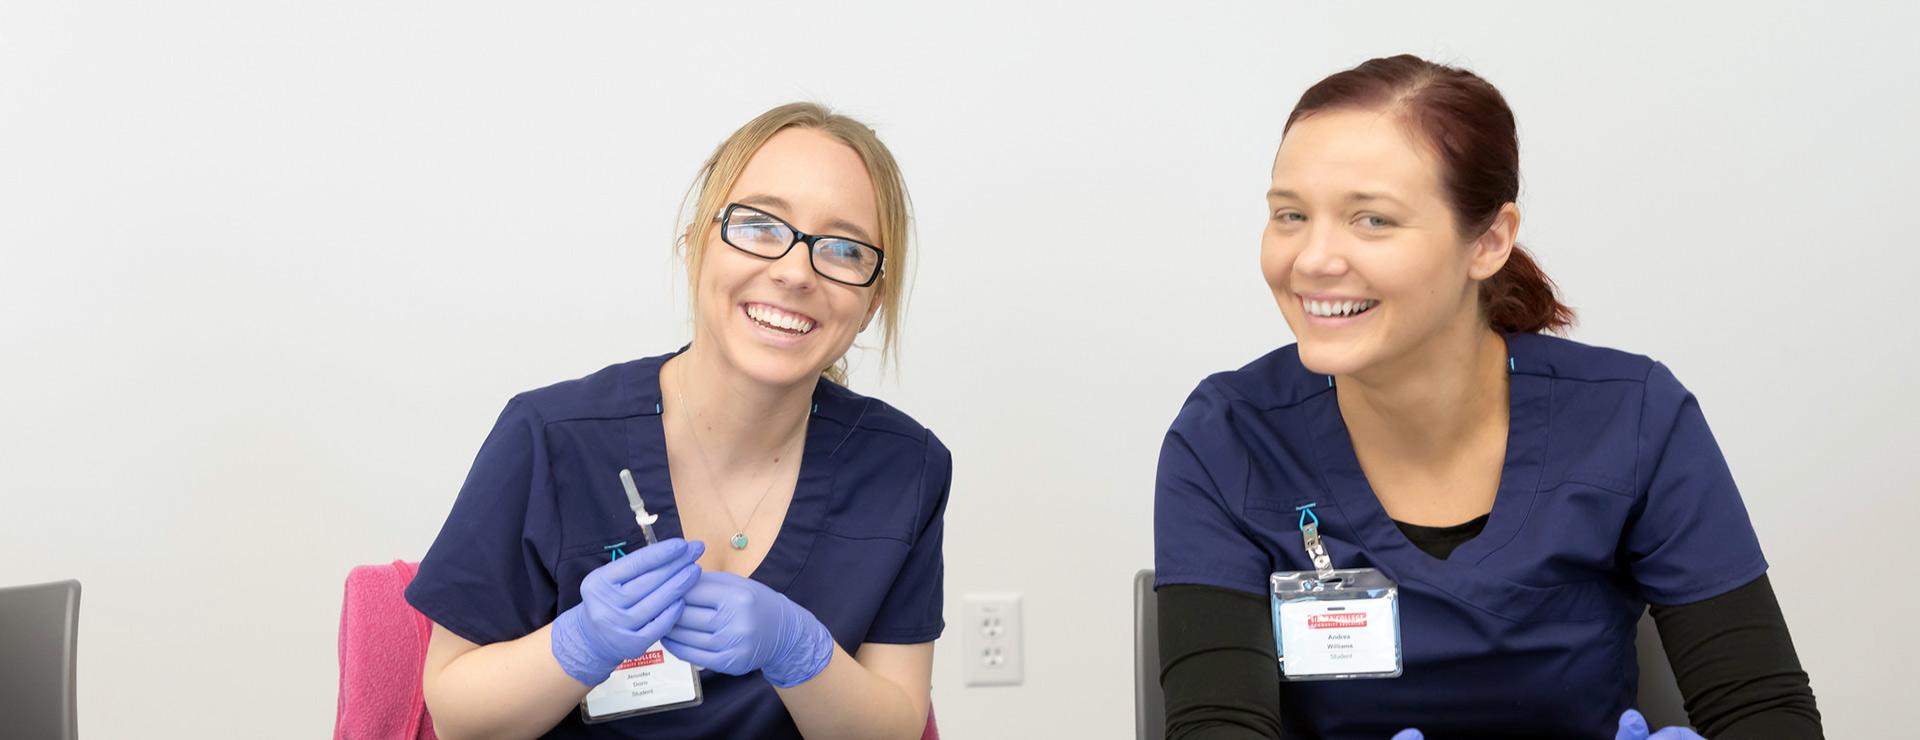 Two smiling female allied health students wearing scrubs